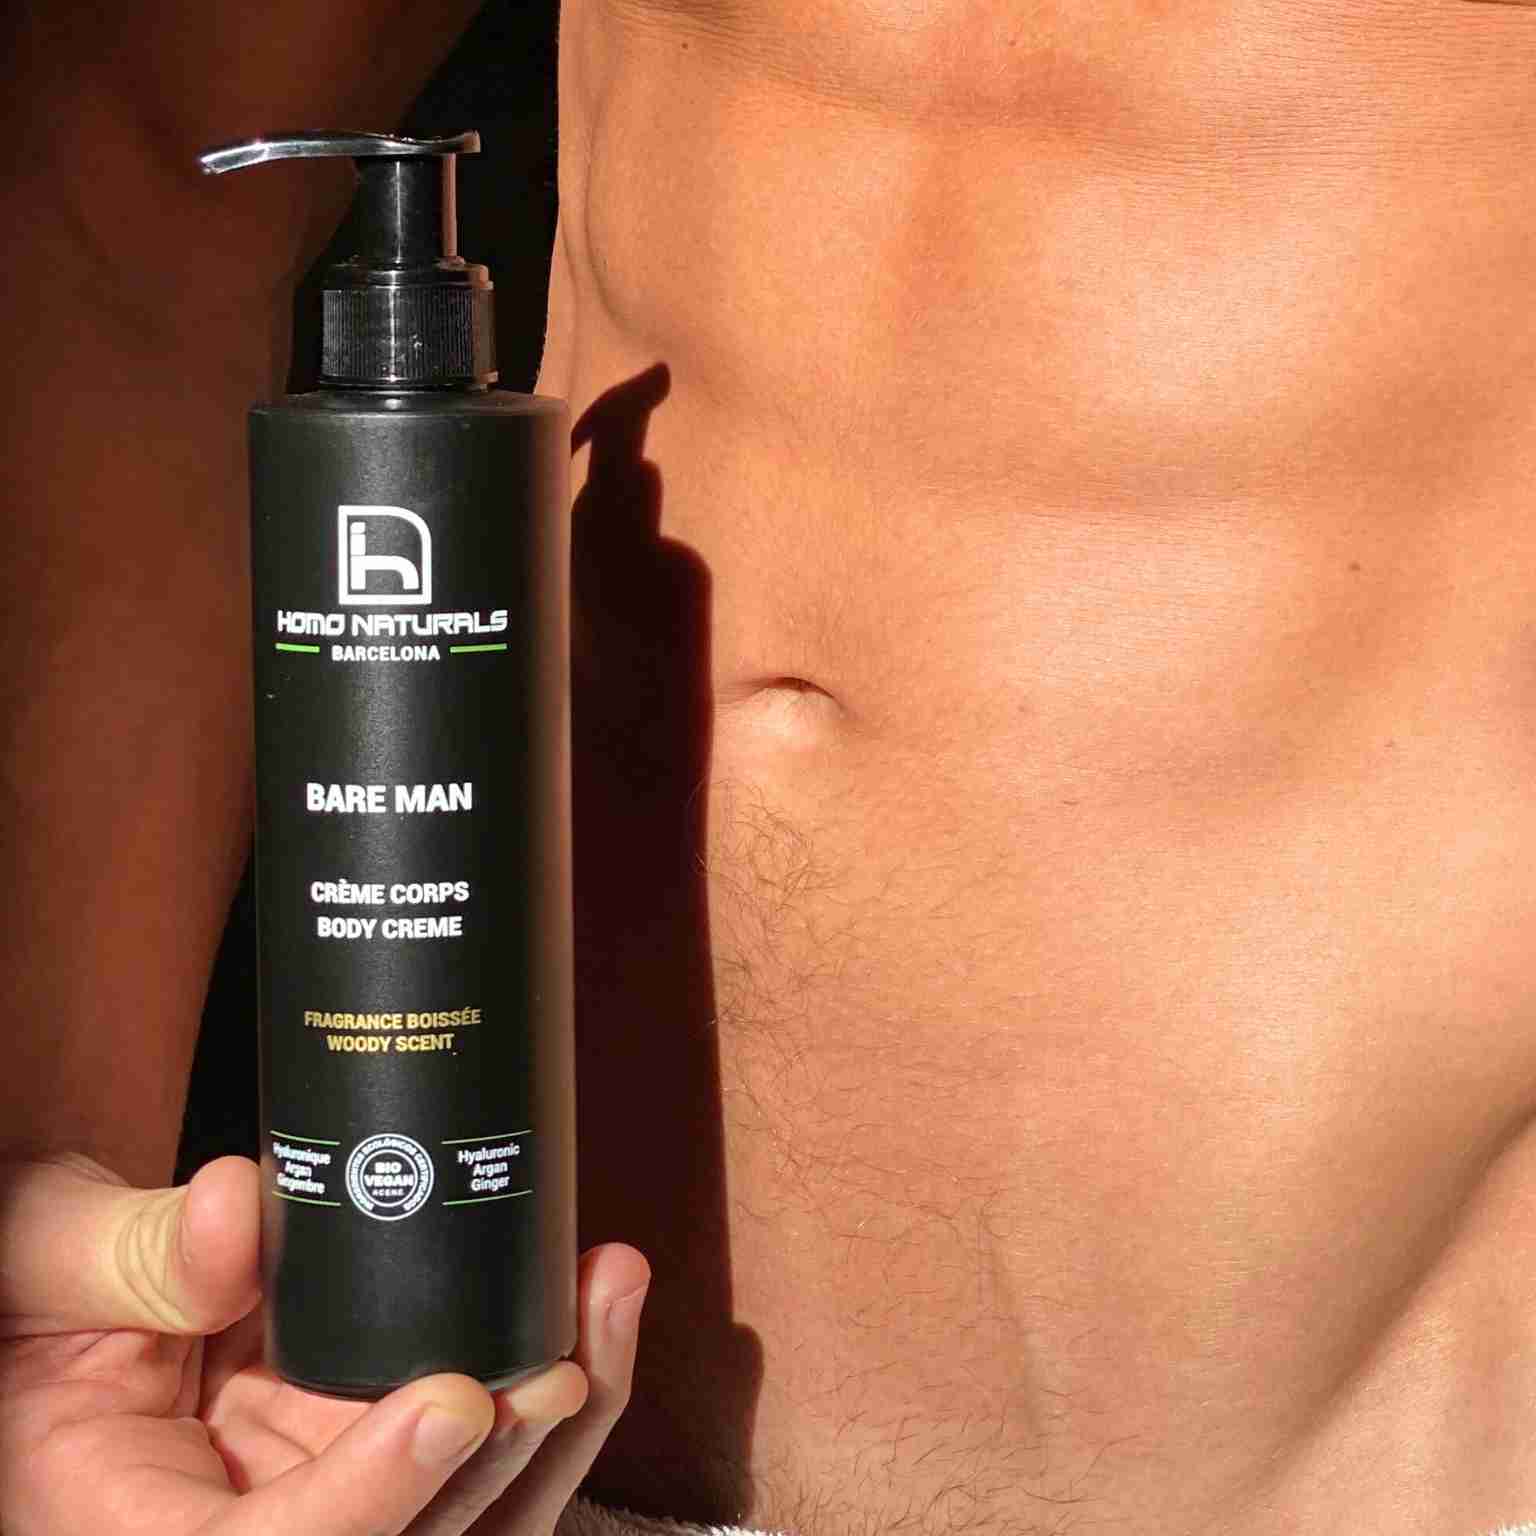 Men's body cream. Nonfat. Quick absorption. Without silicones. Without parabens. With hyaluronic acid. Natural and bio.